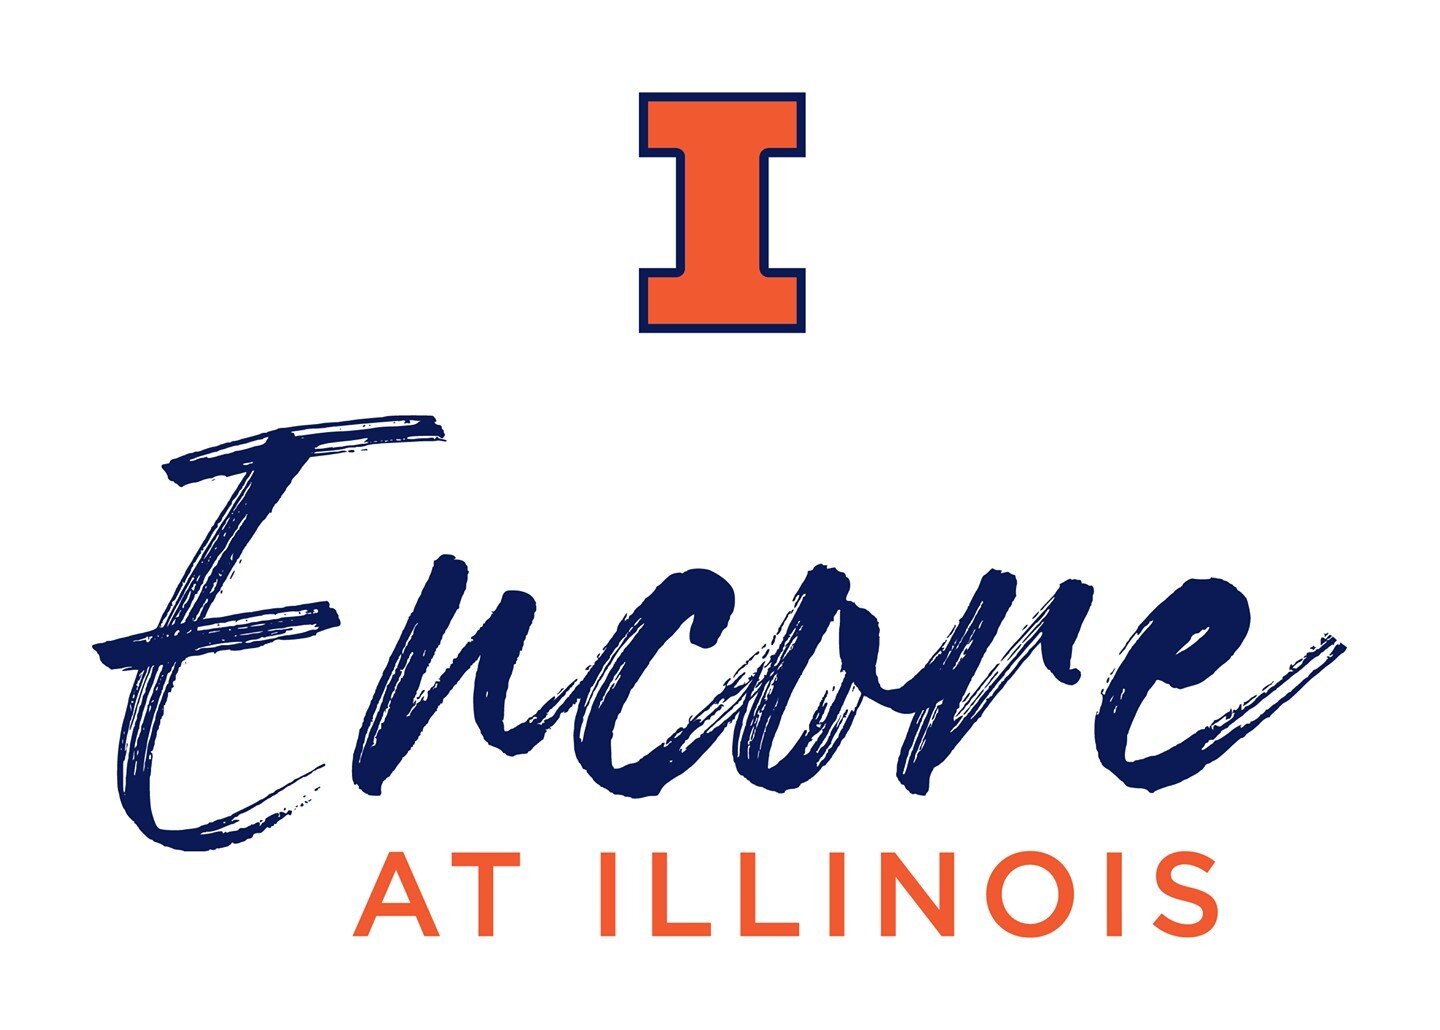 Each Wednesday we will be featuring one of our &quot;Encore at Illinois&quot; panel discussions. This week we present a panel led by Dr. Elizabeth Peterson titled &quot;From Music Major to Arts Management&quot; featuring Kelly Bryan, Executive Direct